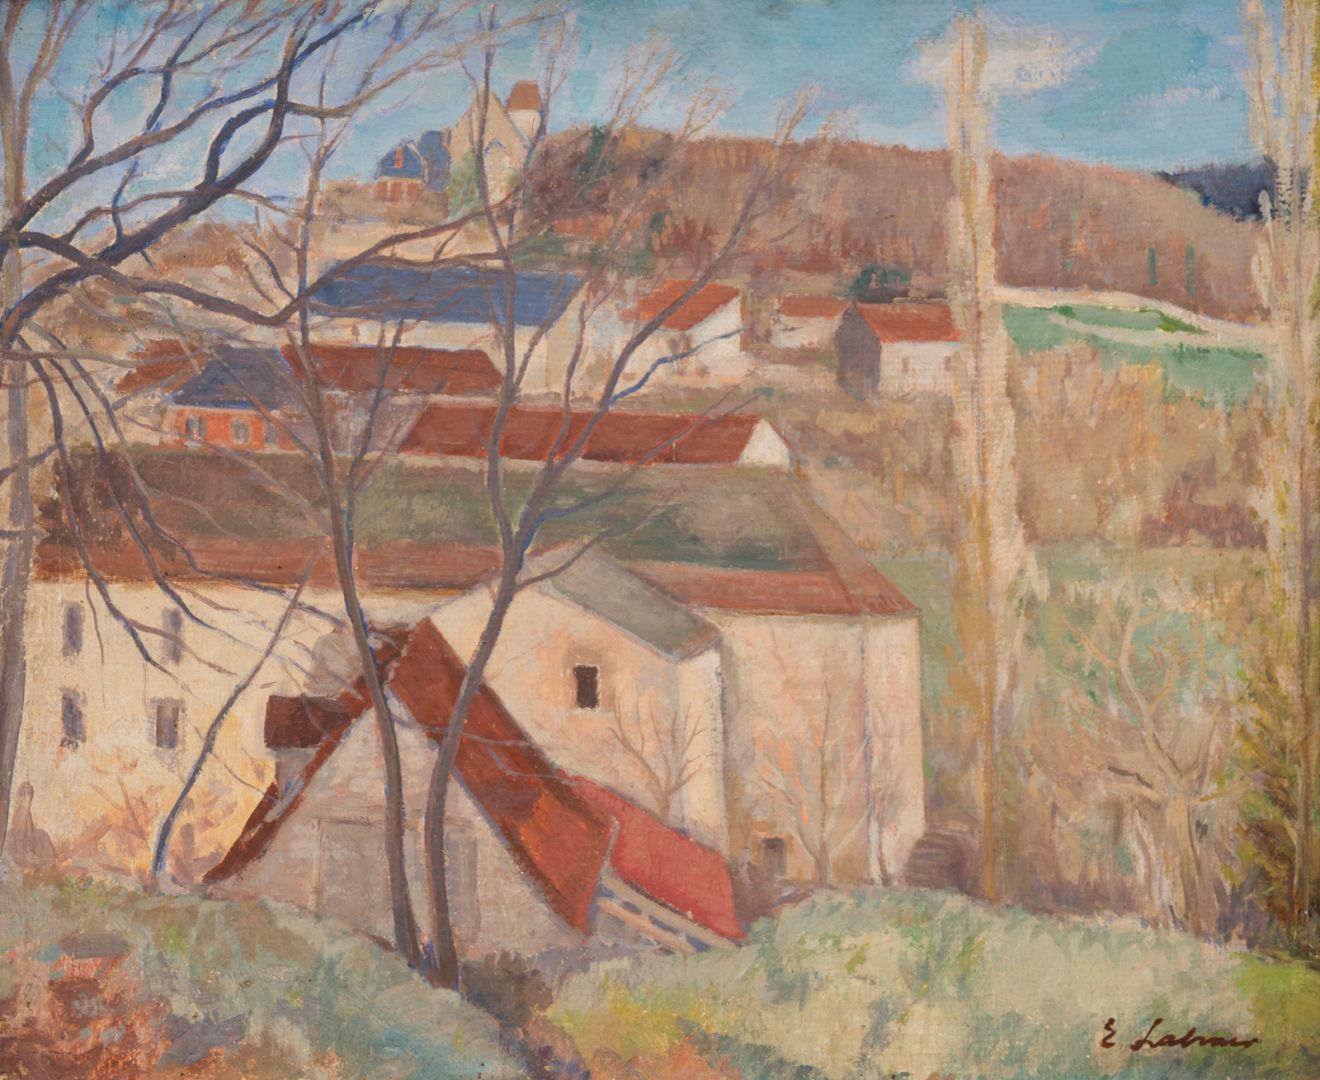 Null Emile LAHNER (1893-1980)

Red roofs

Oil on panel, signed lower right

60 x&hellip;